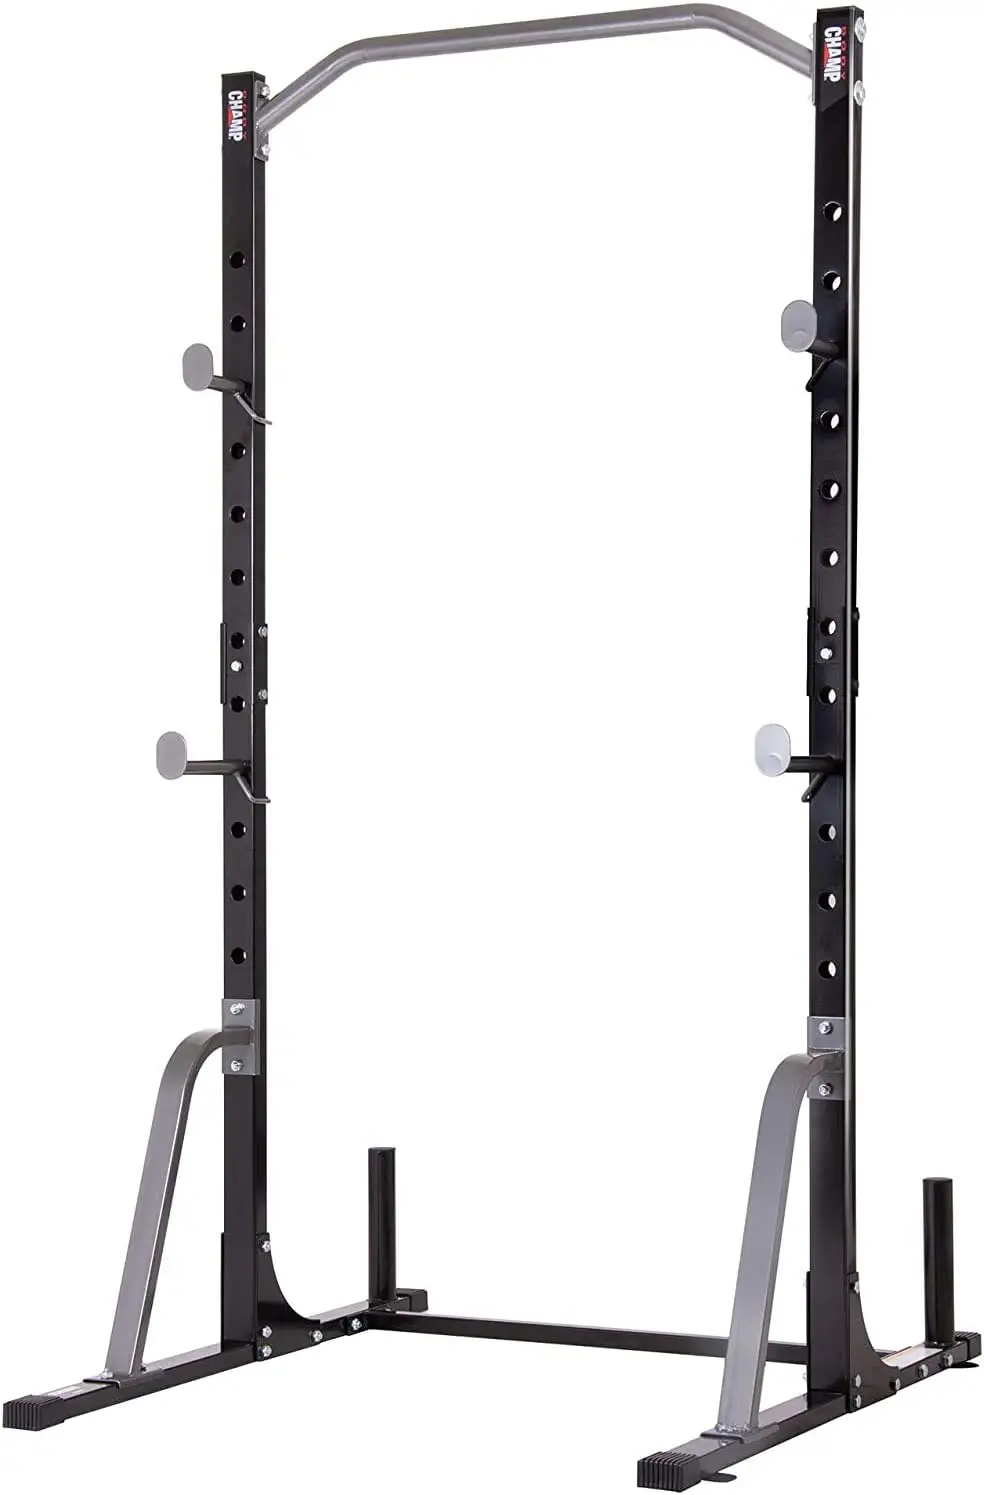 

System Adjustable Squat Weight and Bar Holder for Home Fitness Equipment with Built in Floor Anchors Stability Workout equipmen